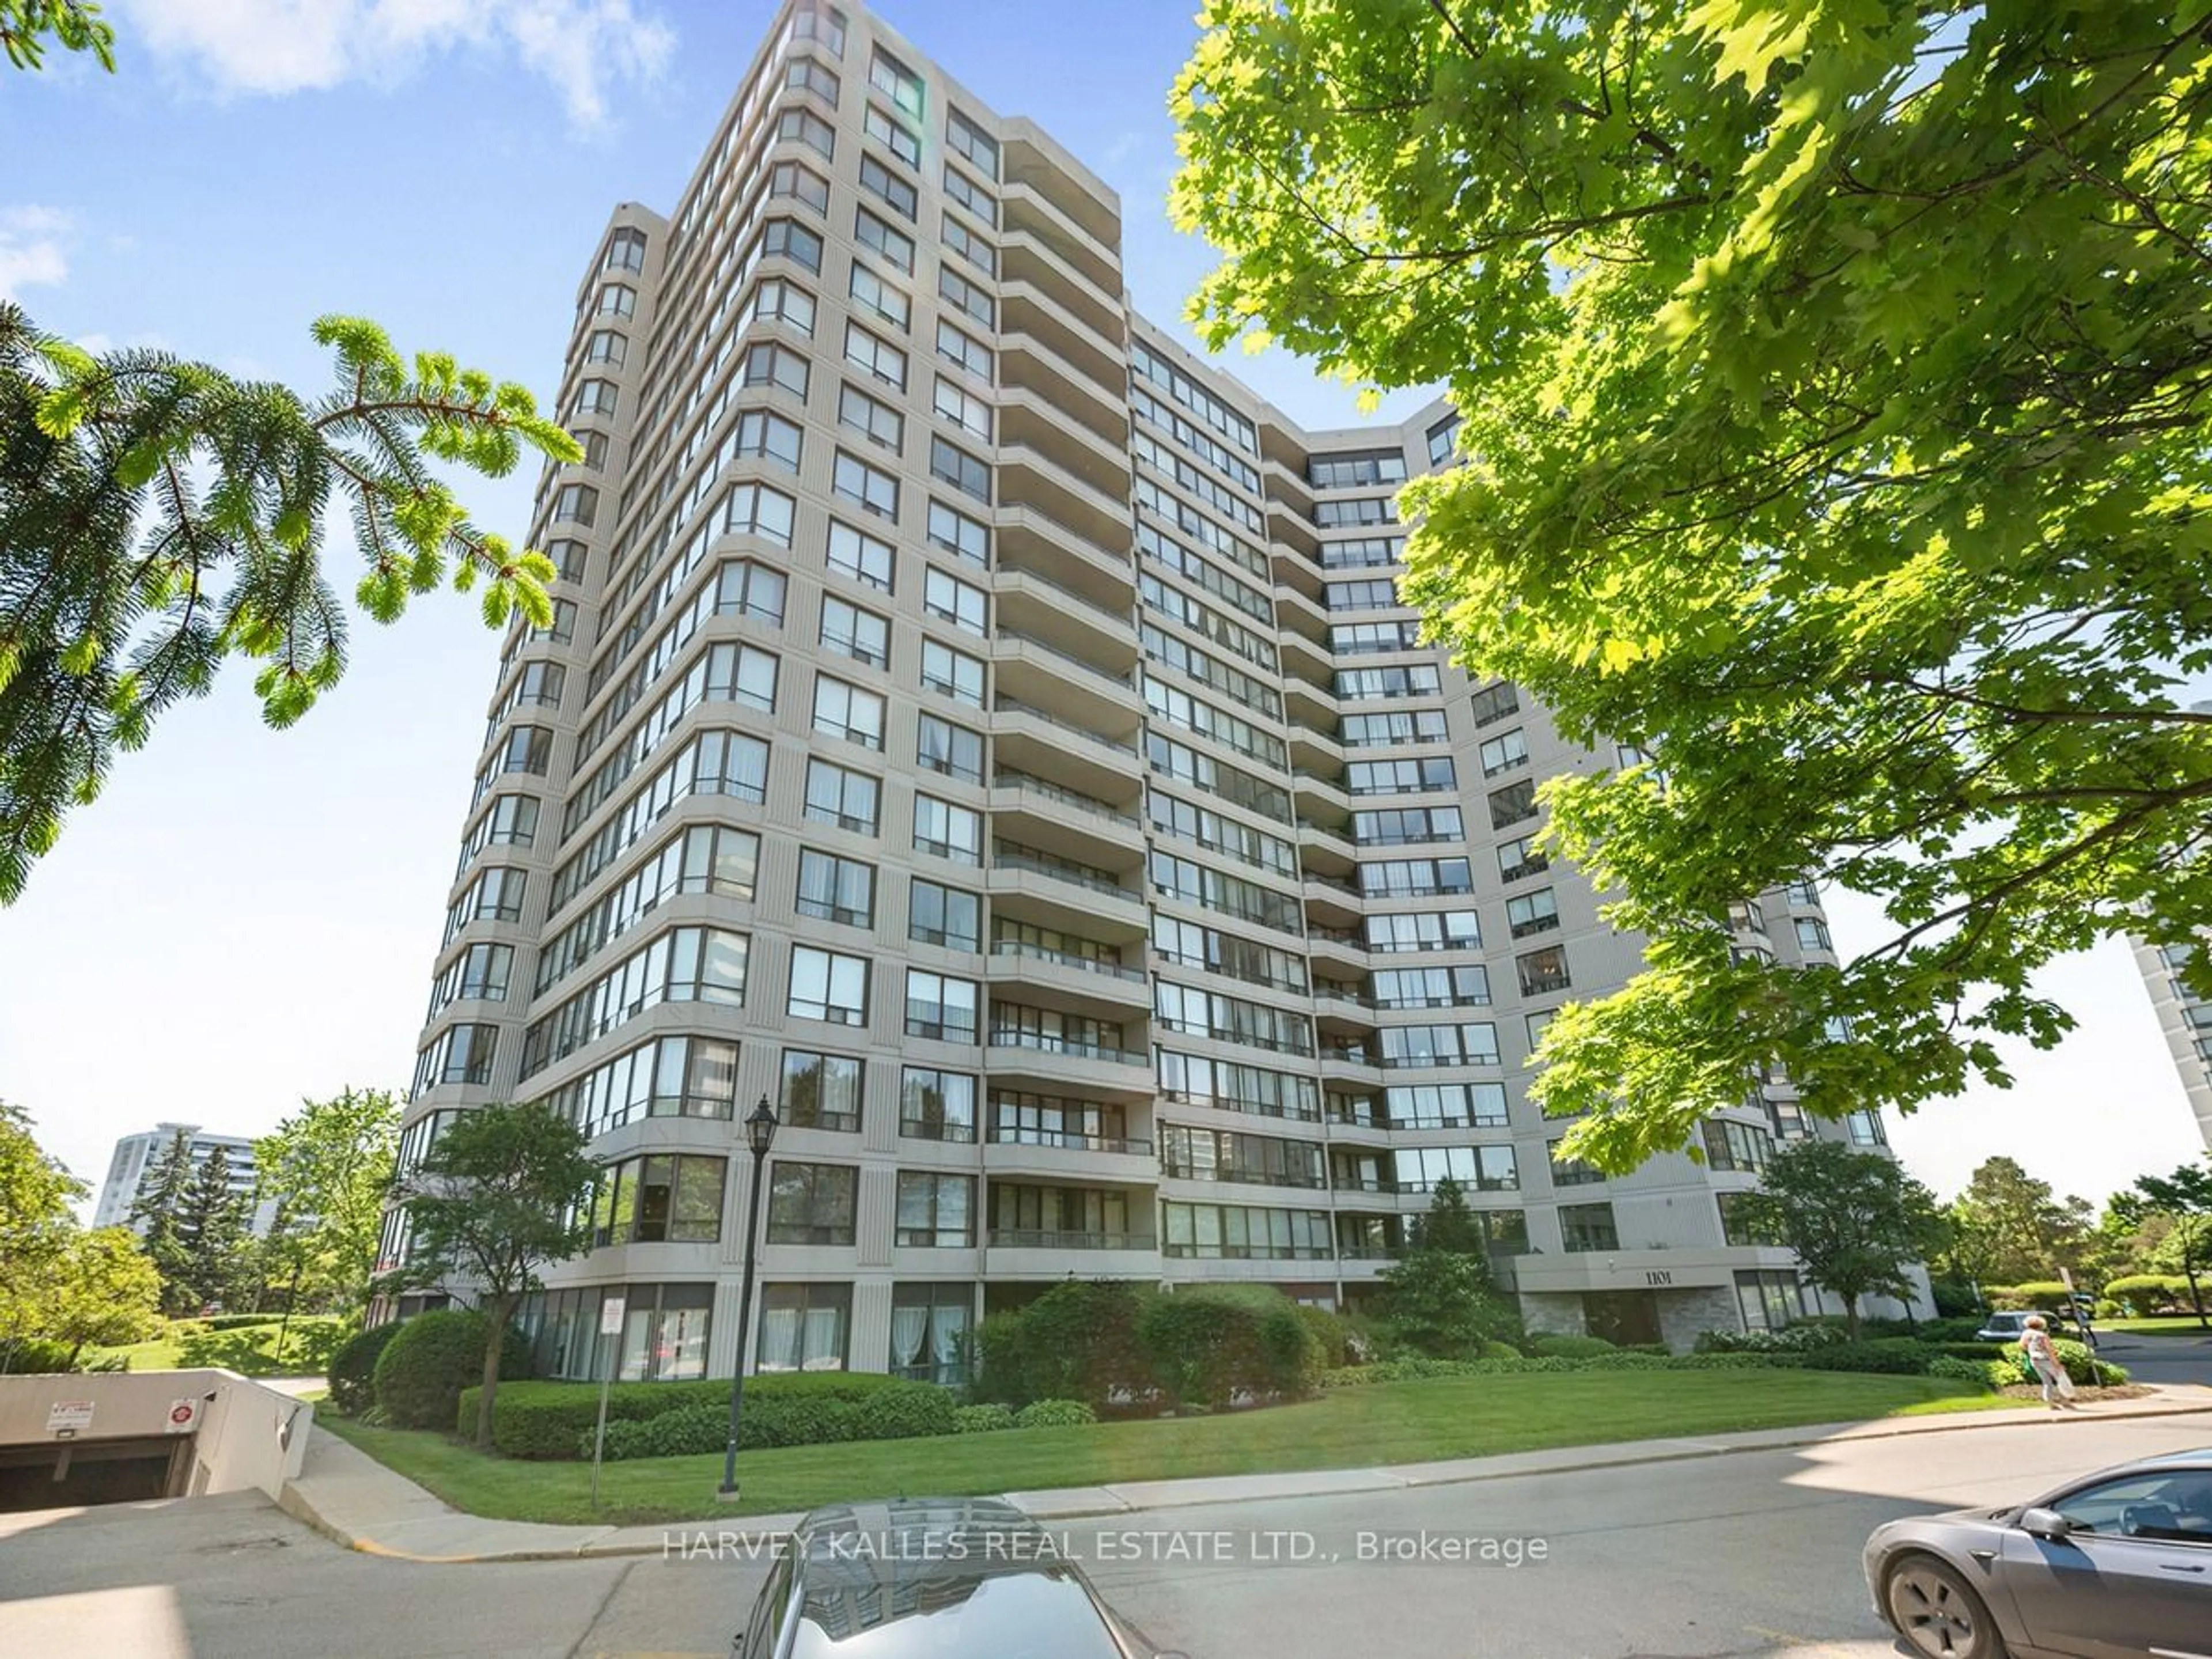 A pic from exterior of the house or condo for 1101 Steeles Ave #214, Toronto Ontario M2R 3W5